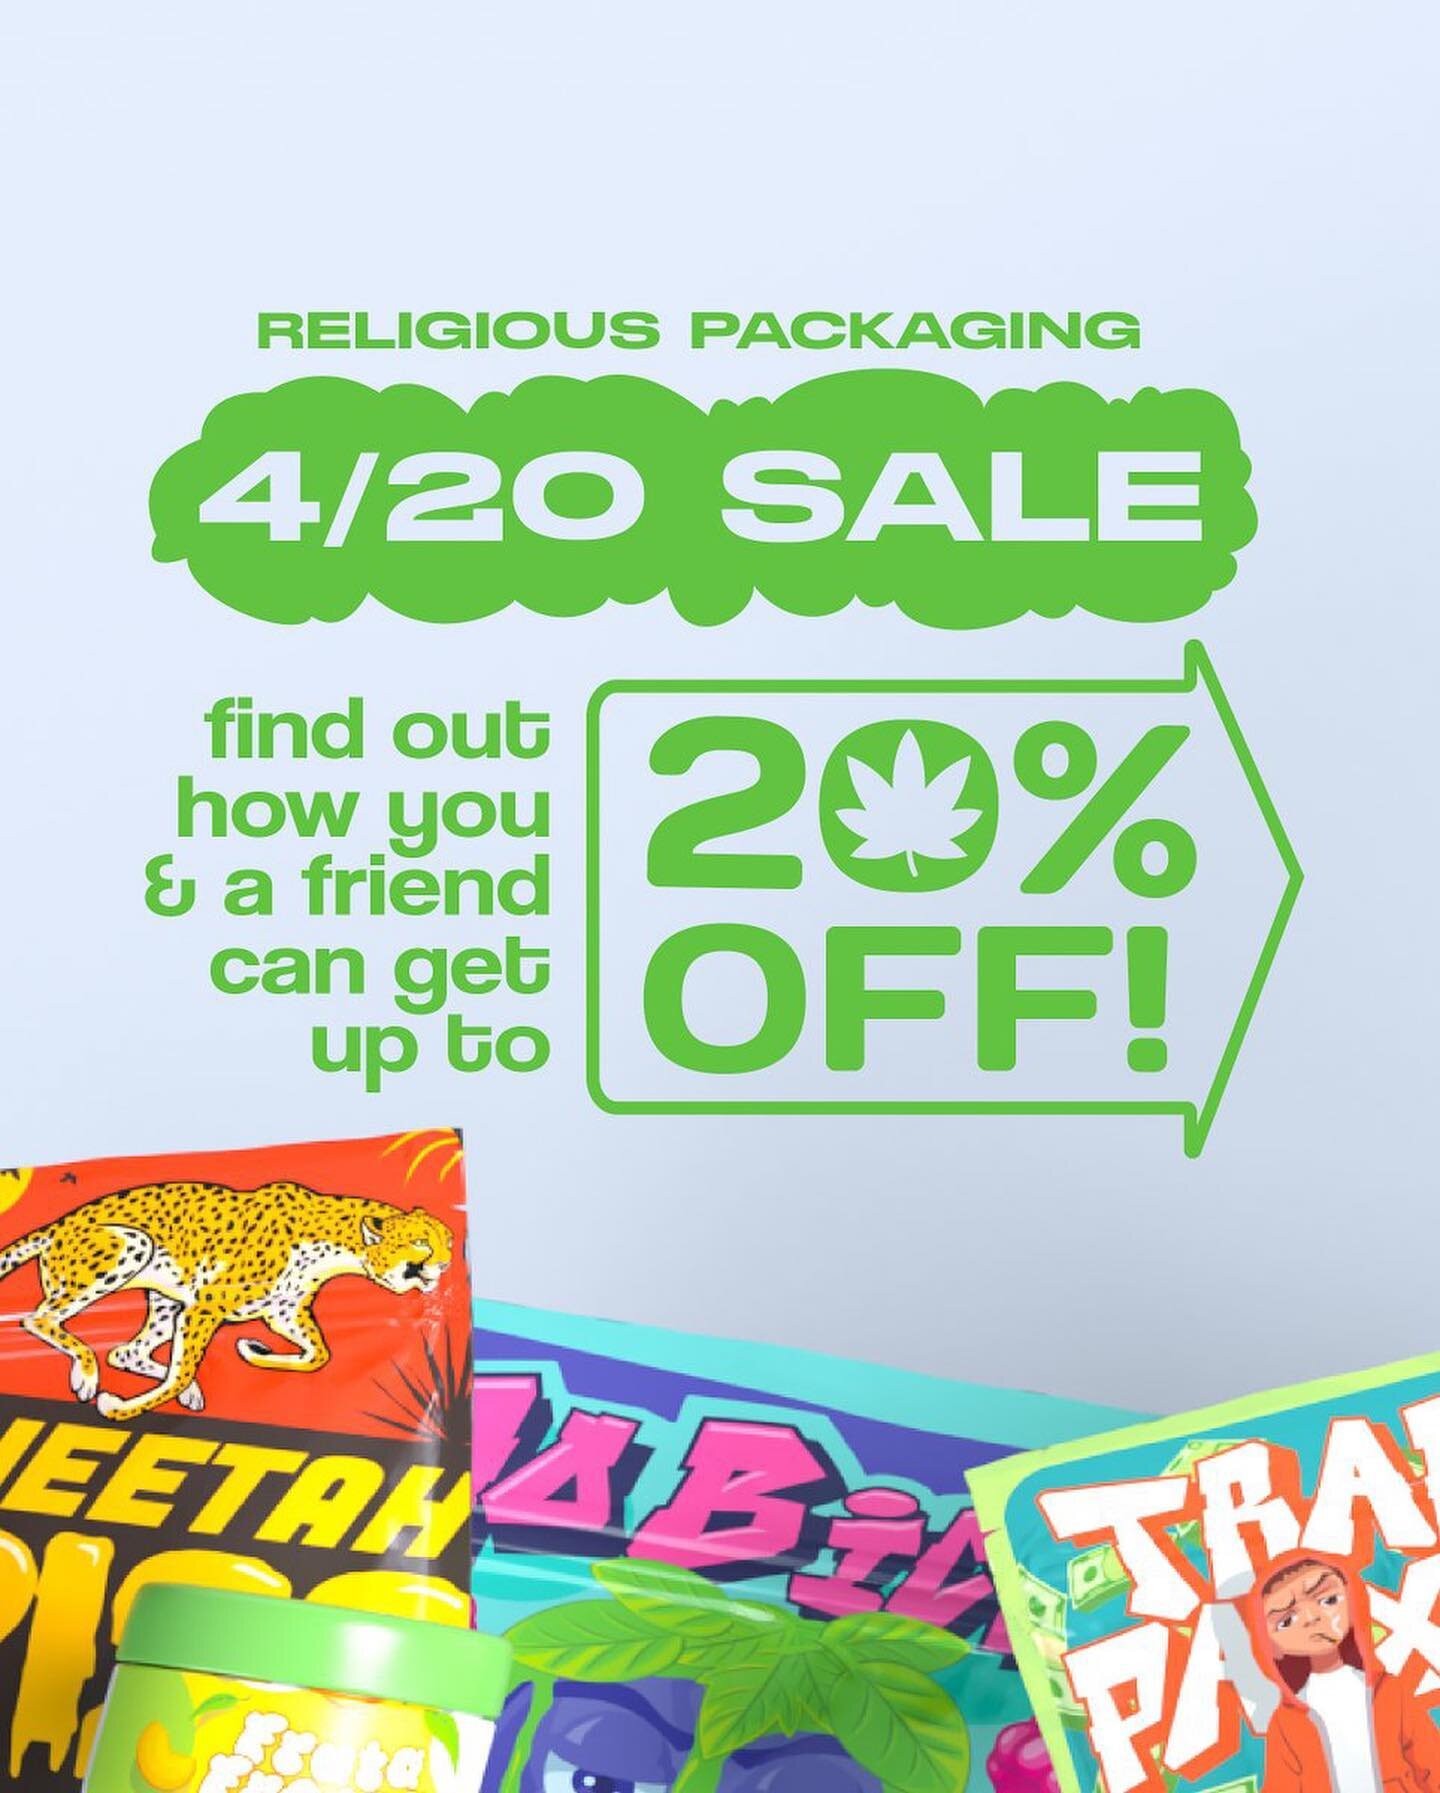 4/20 is right around the corner! Here is a little gift from the RP team to you! Stay high my friends! #religiouspackagingllc